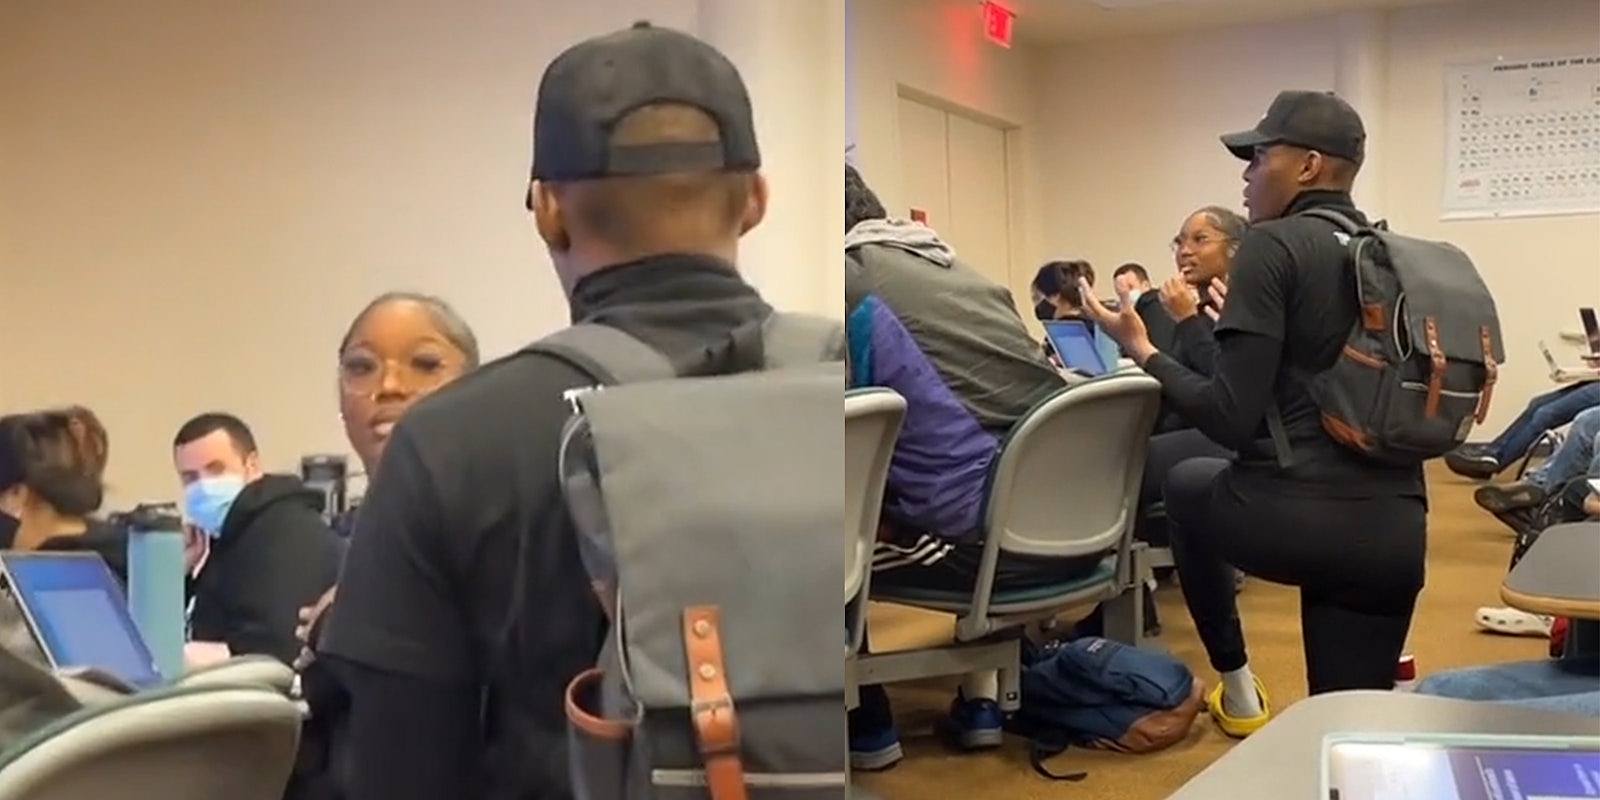 man attempts to ask woman to be his girlfriend in class, gets rejected